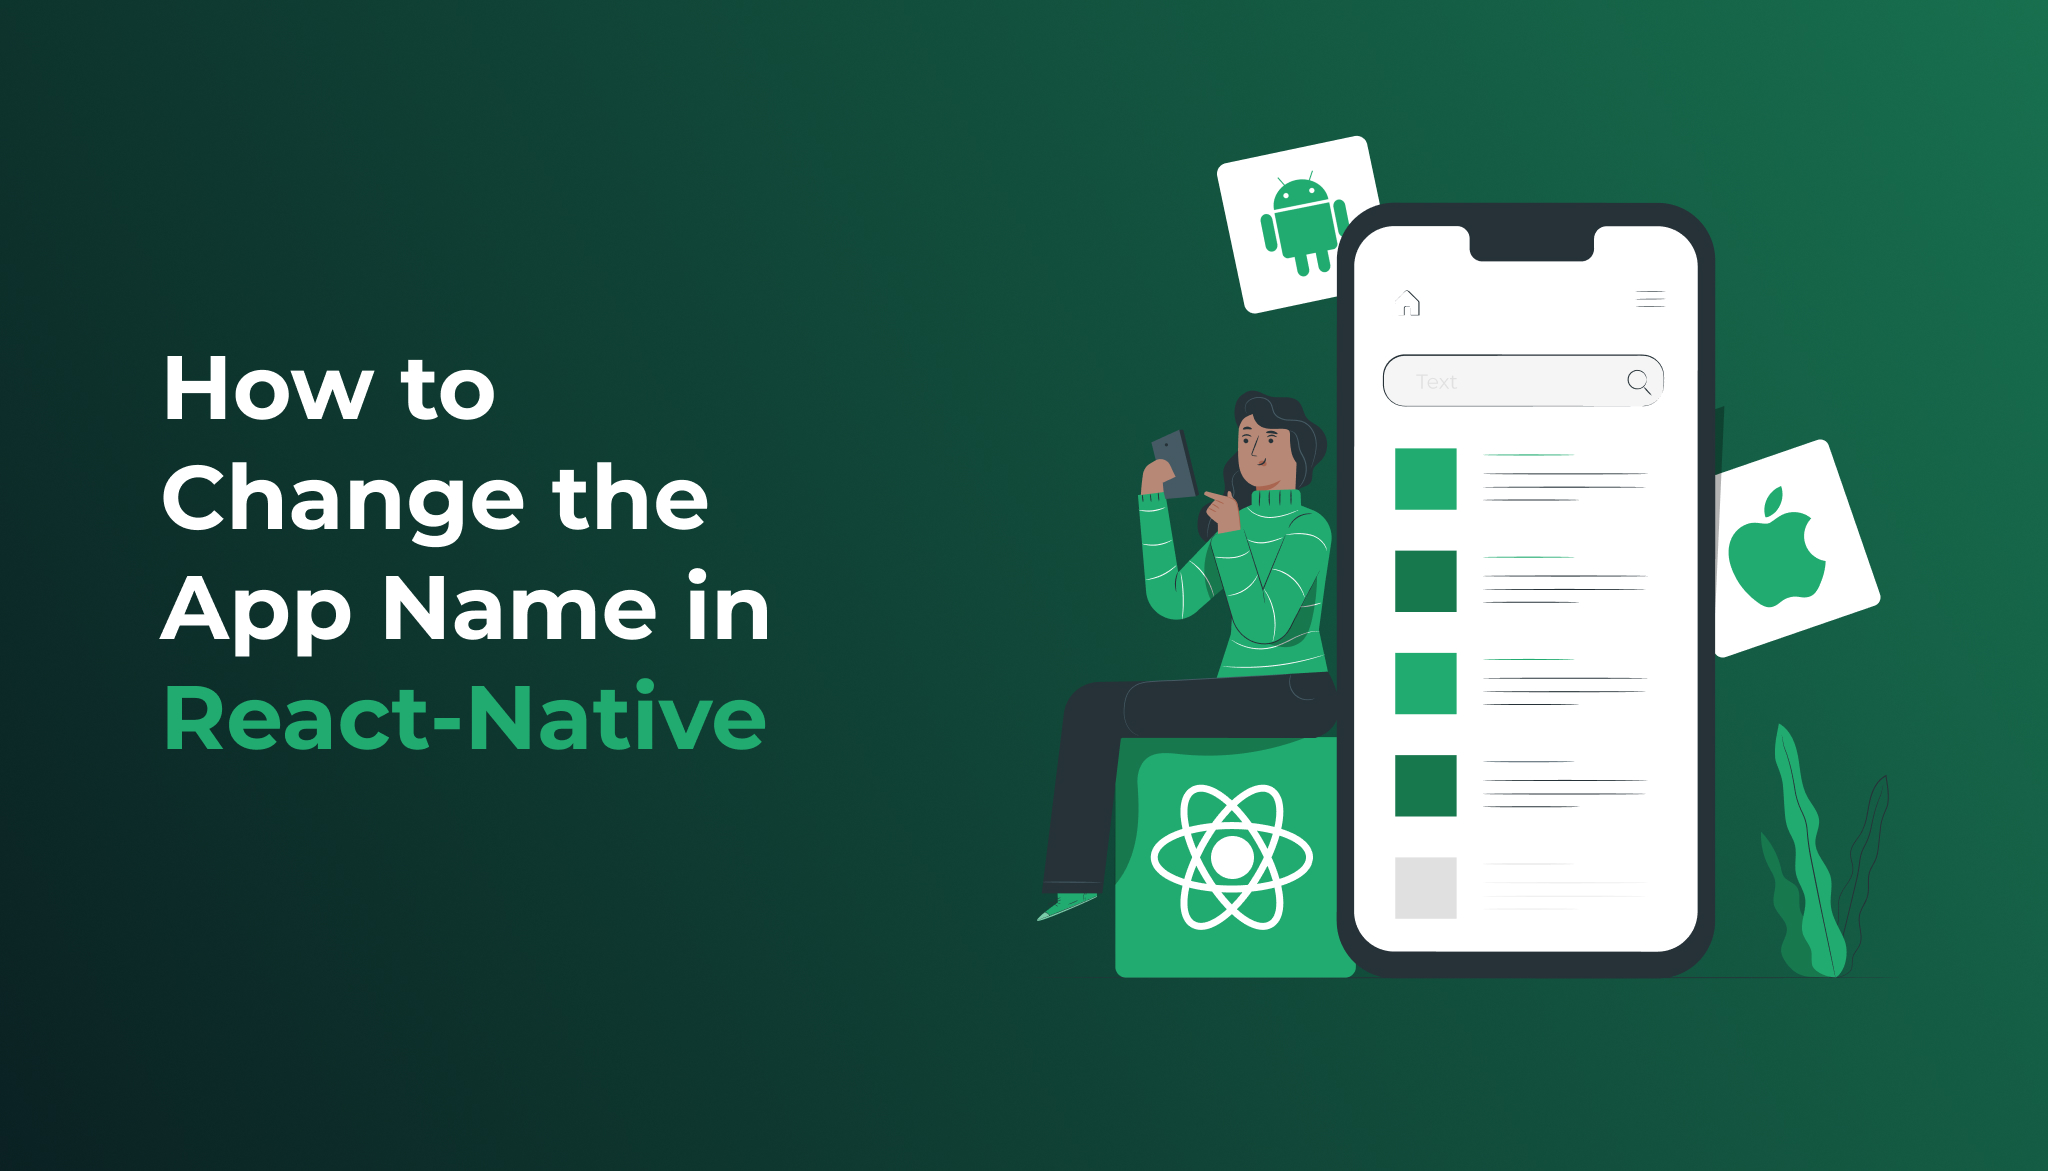 How to Change the App Name in React-Native